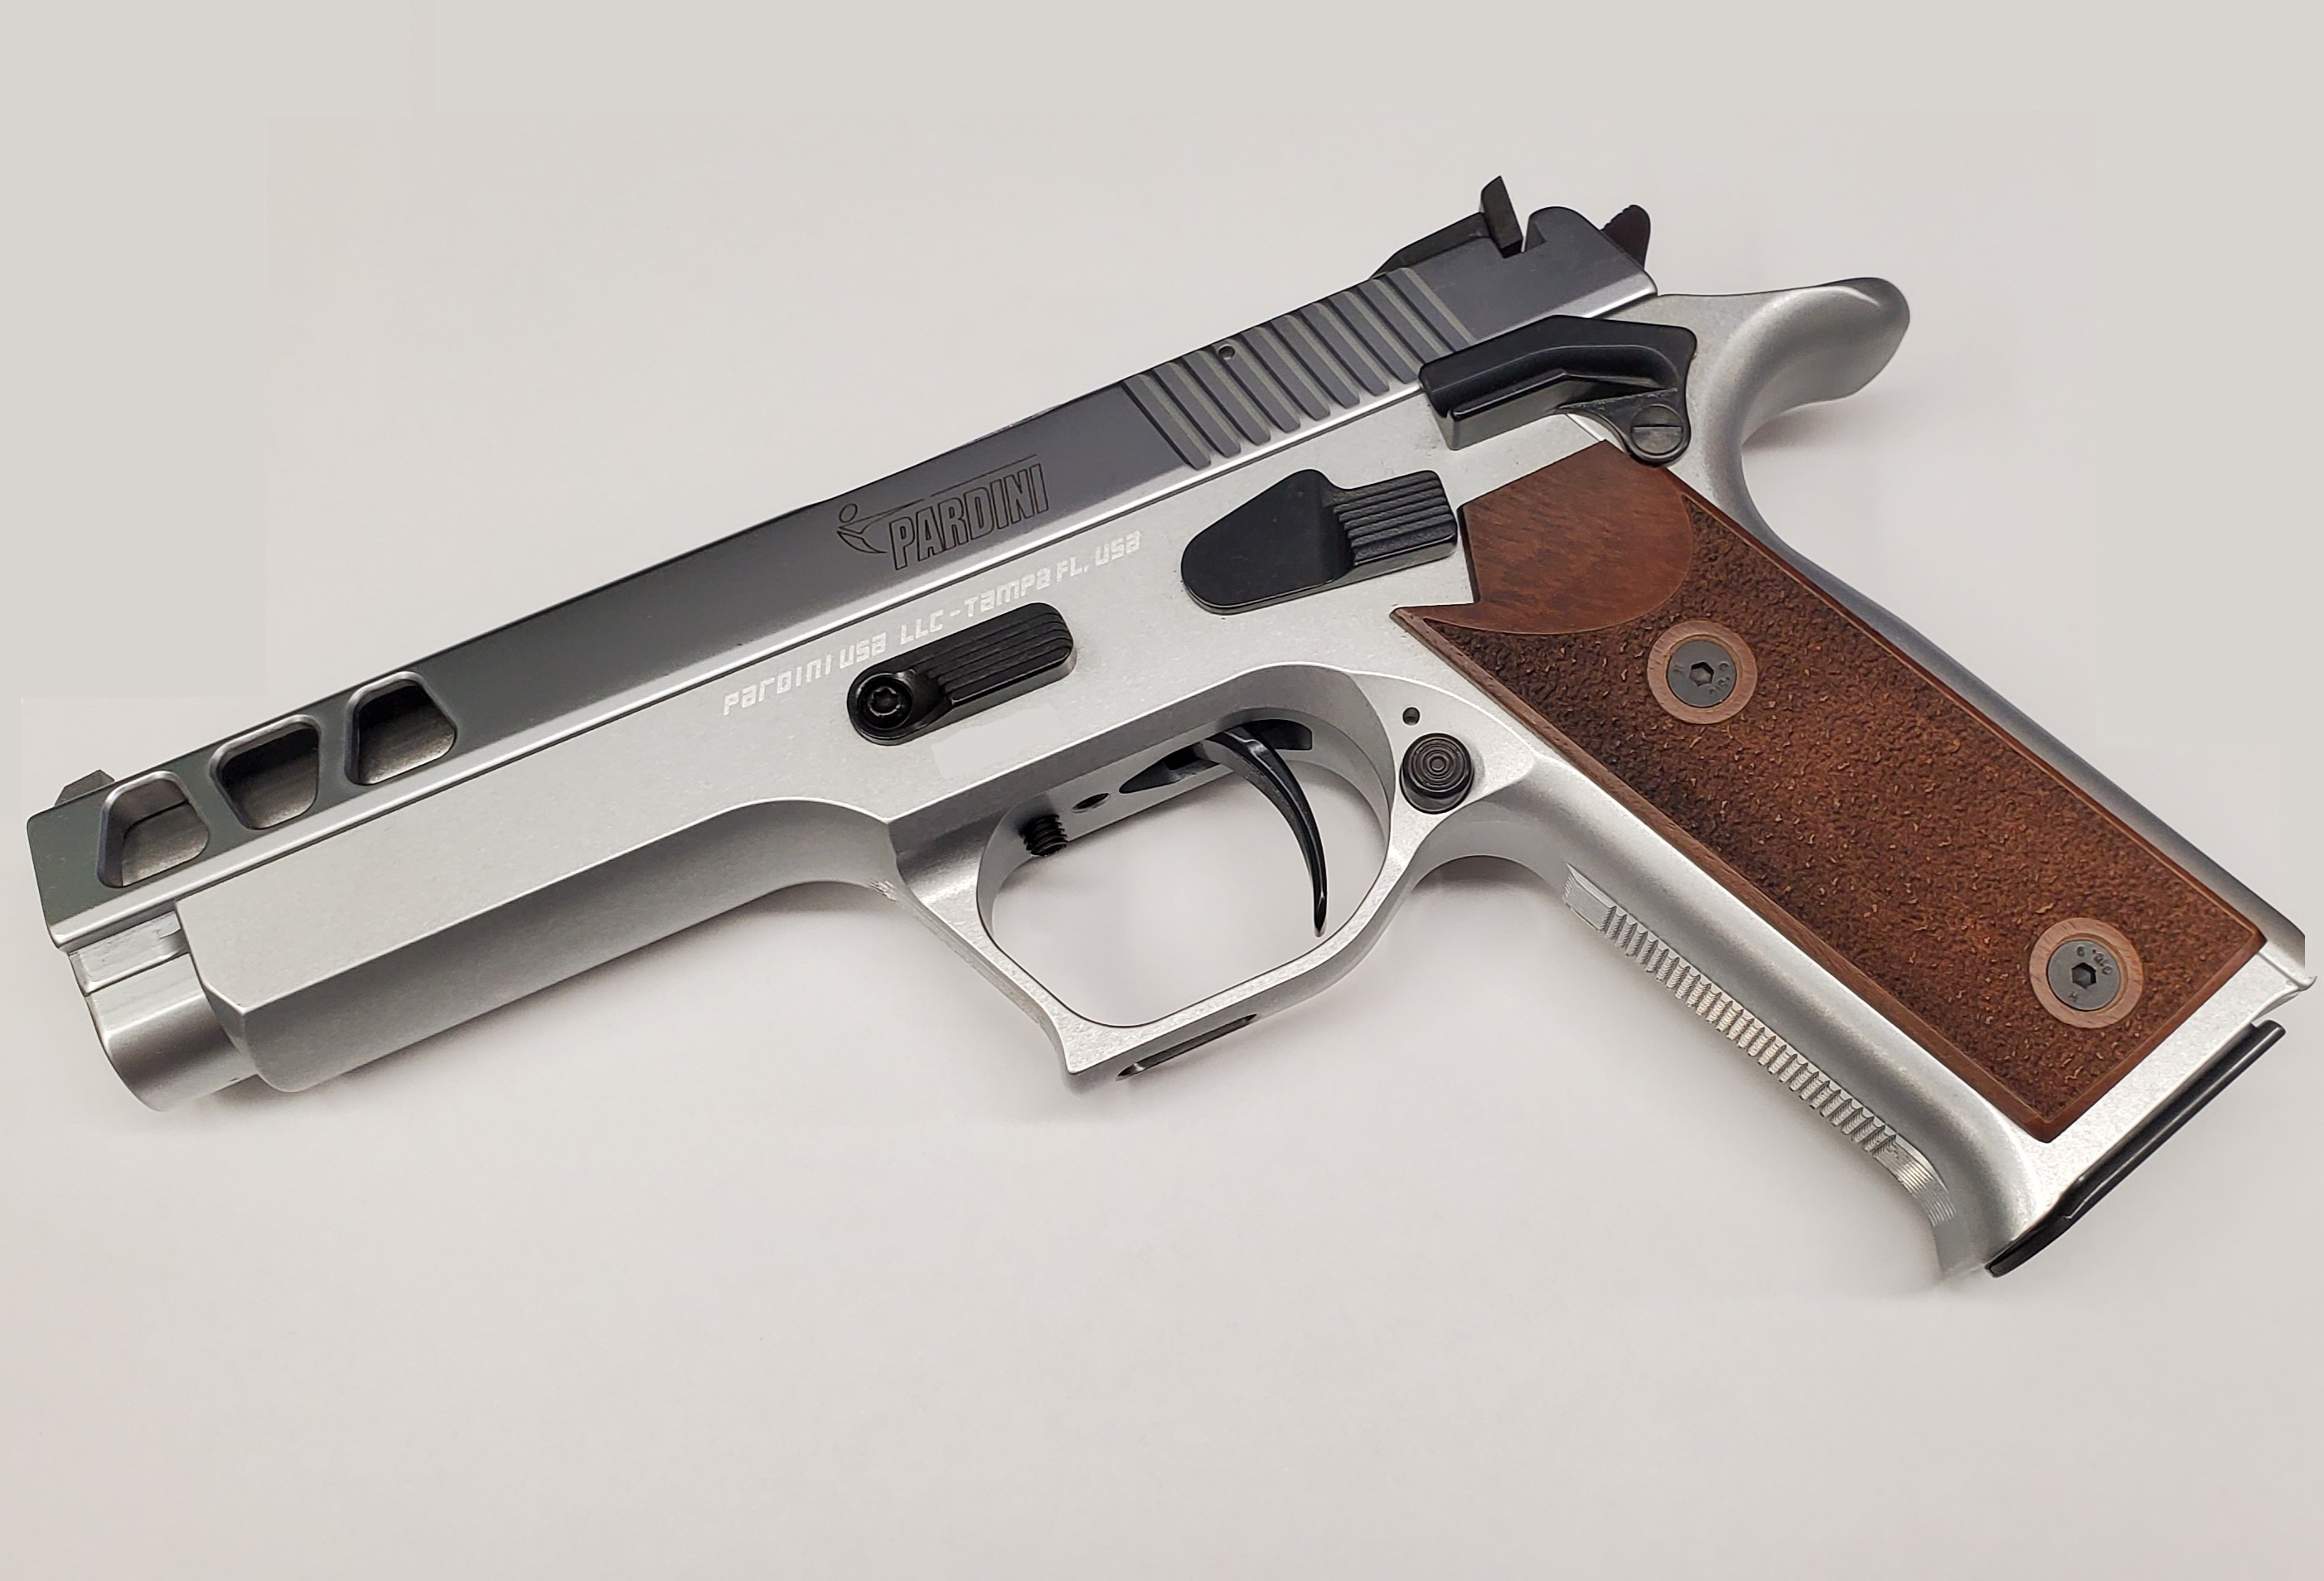 Pardini GT 45, 5 inch, Cal. 45 ACP, Silver, NRA, IPSC